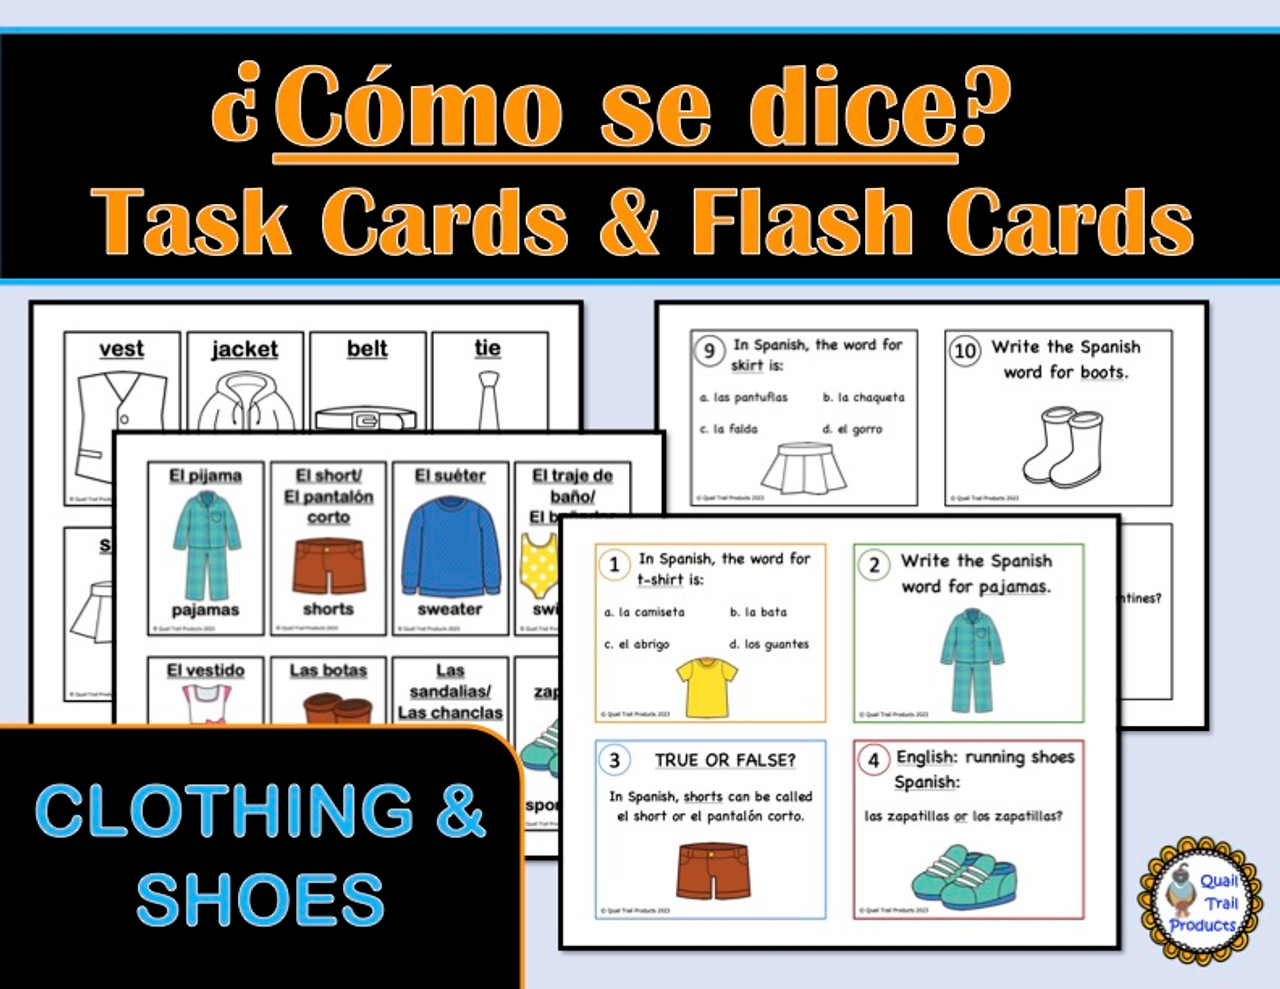 Spanish　and　Task　Flashcards　Cards　and　Clothing　Shoes